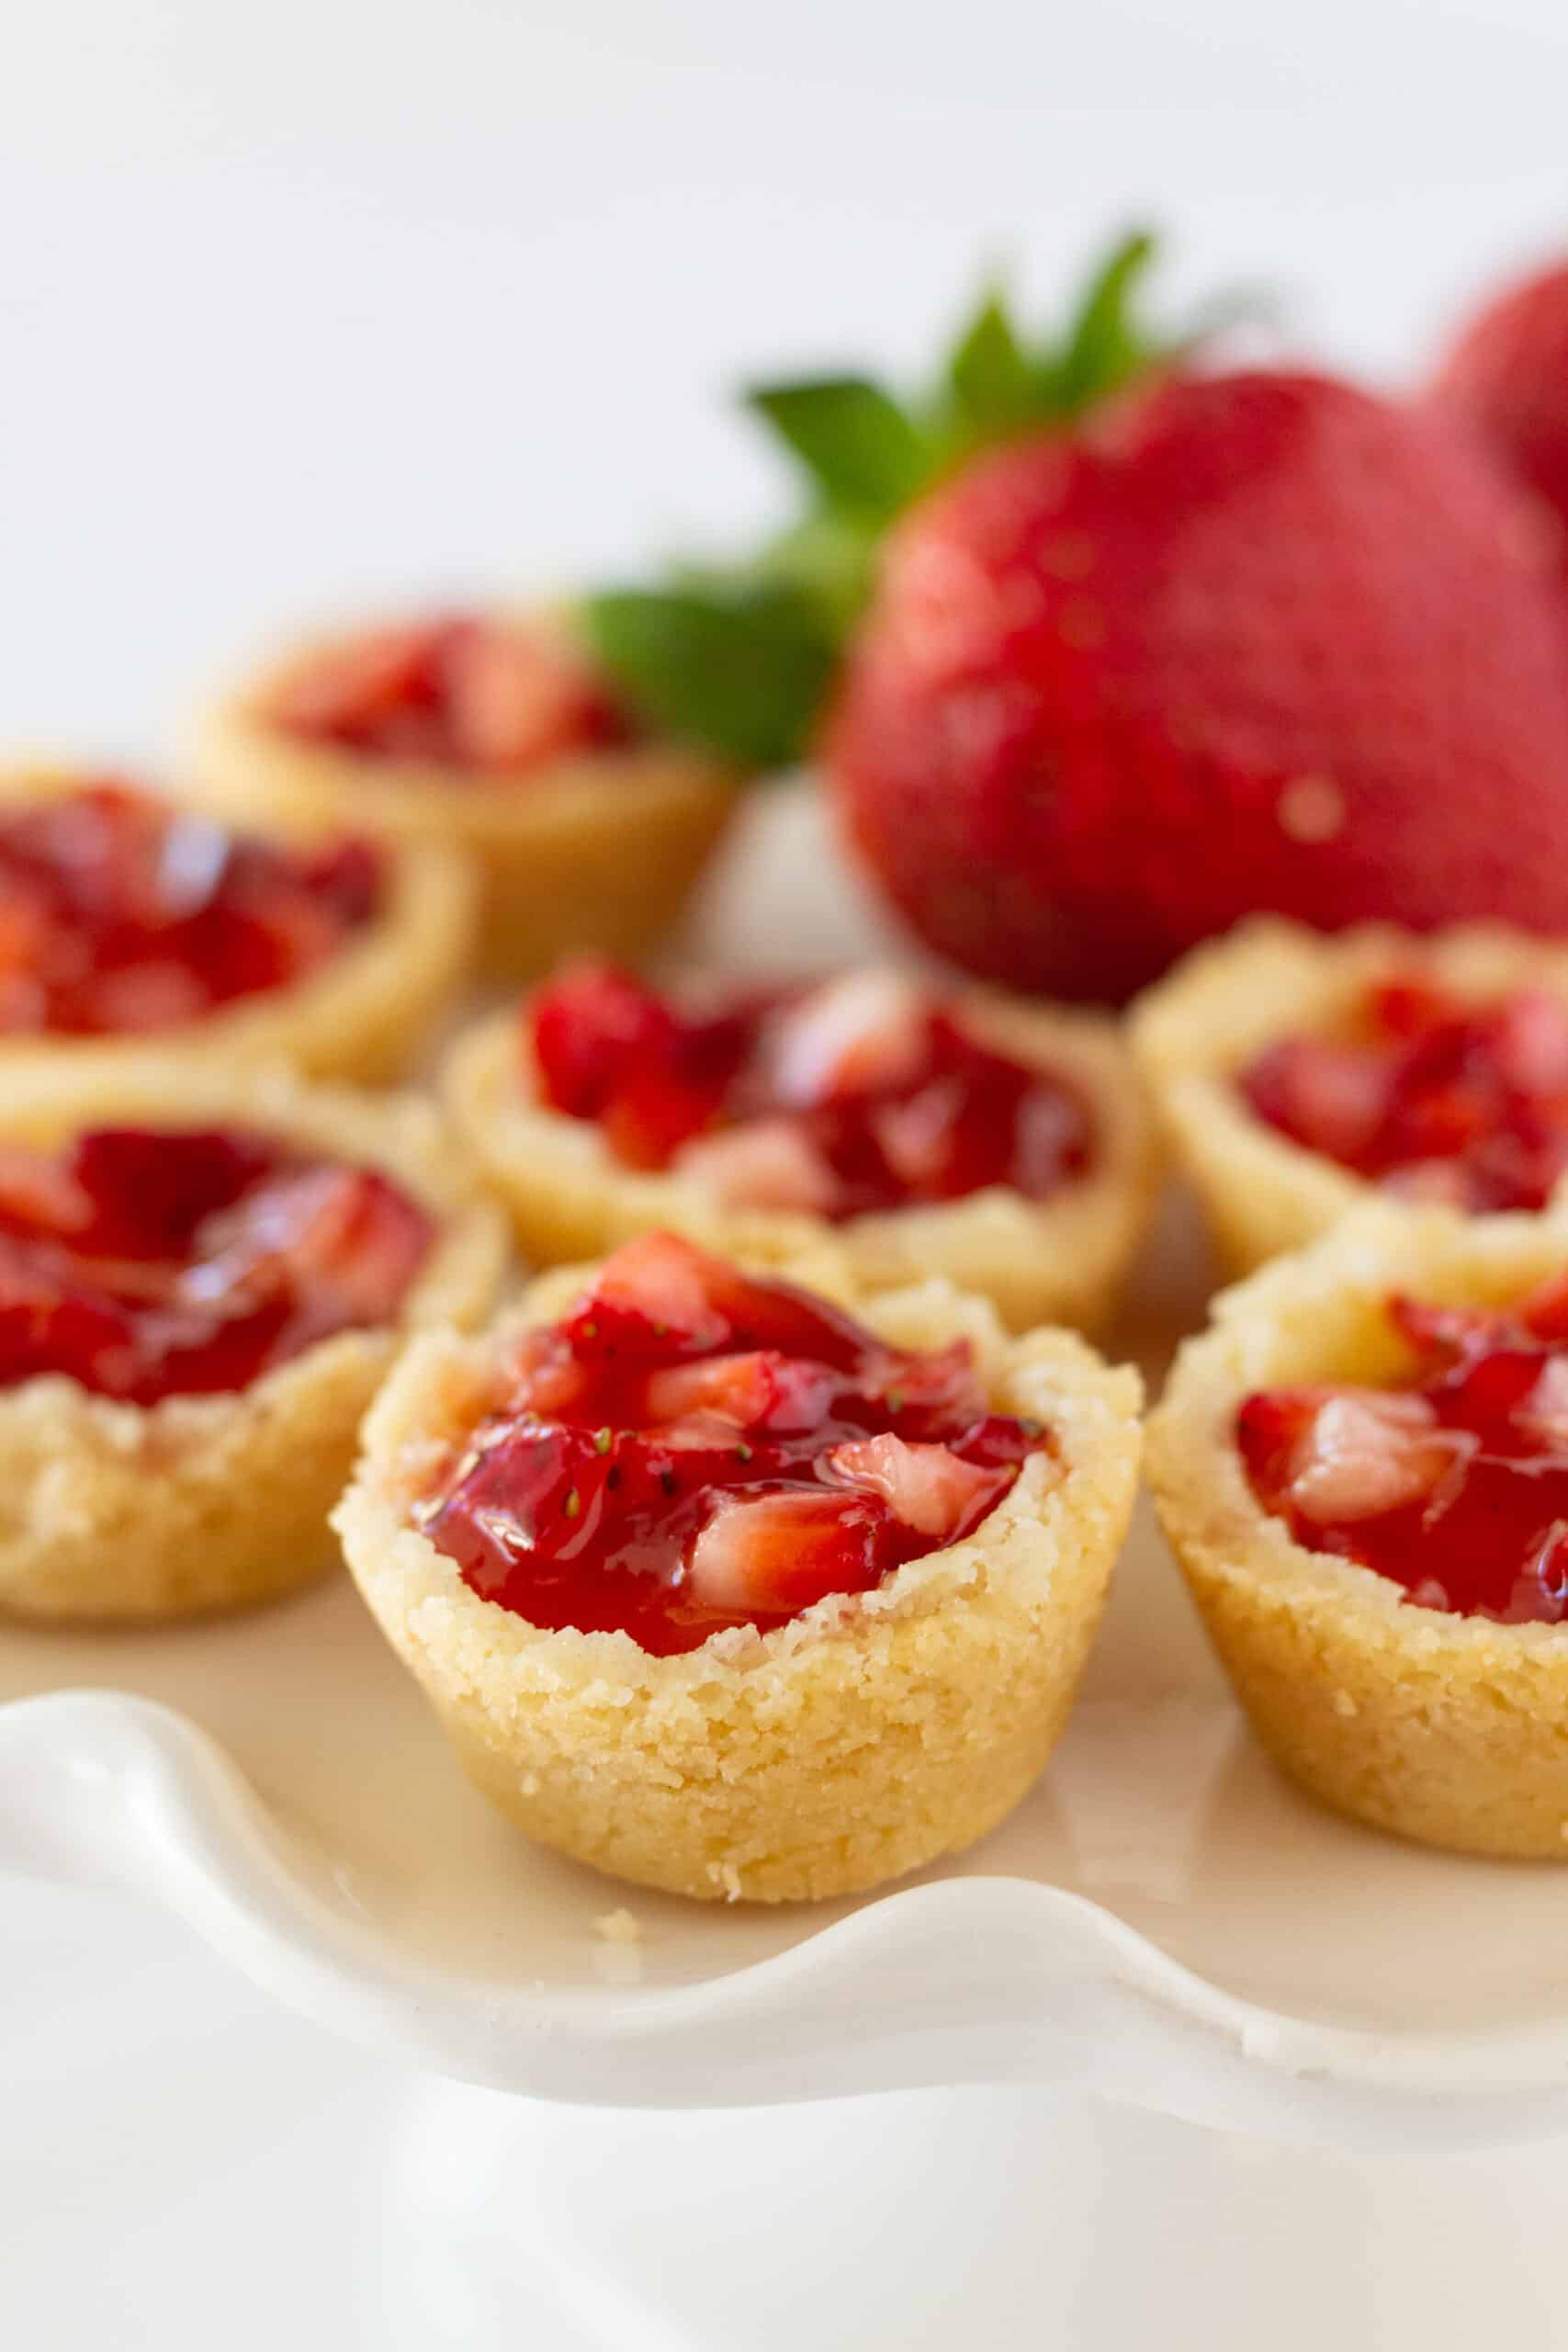 Strawberry Cream Cheese Pastry Bites Recipe featured by top US dessert blogger, Practically Homemade